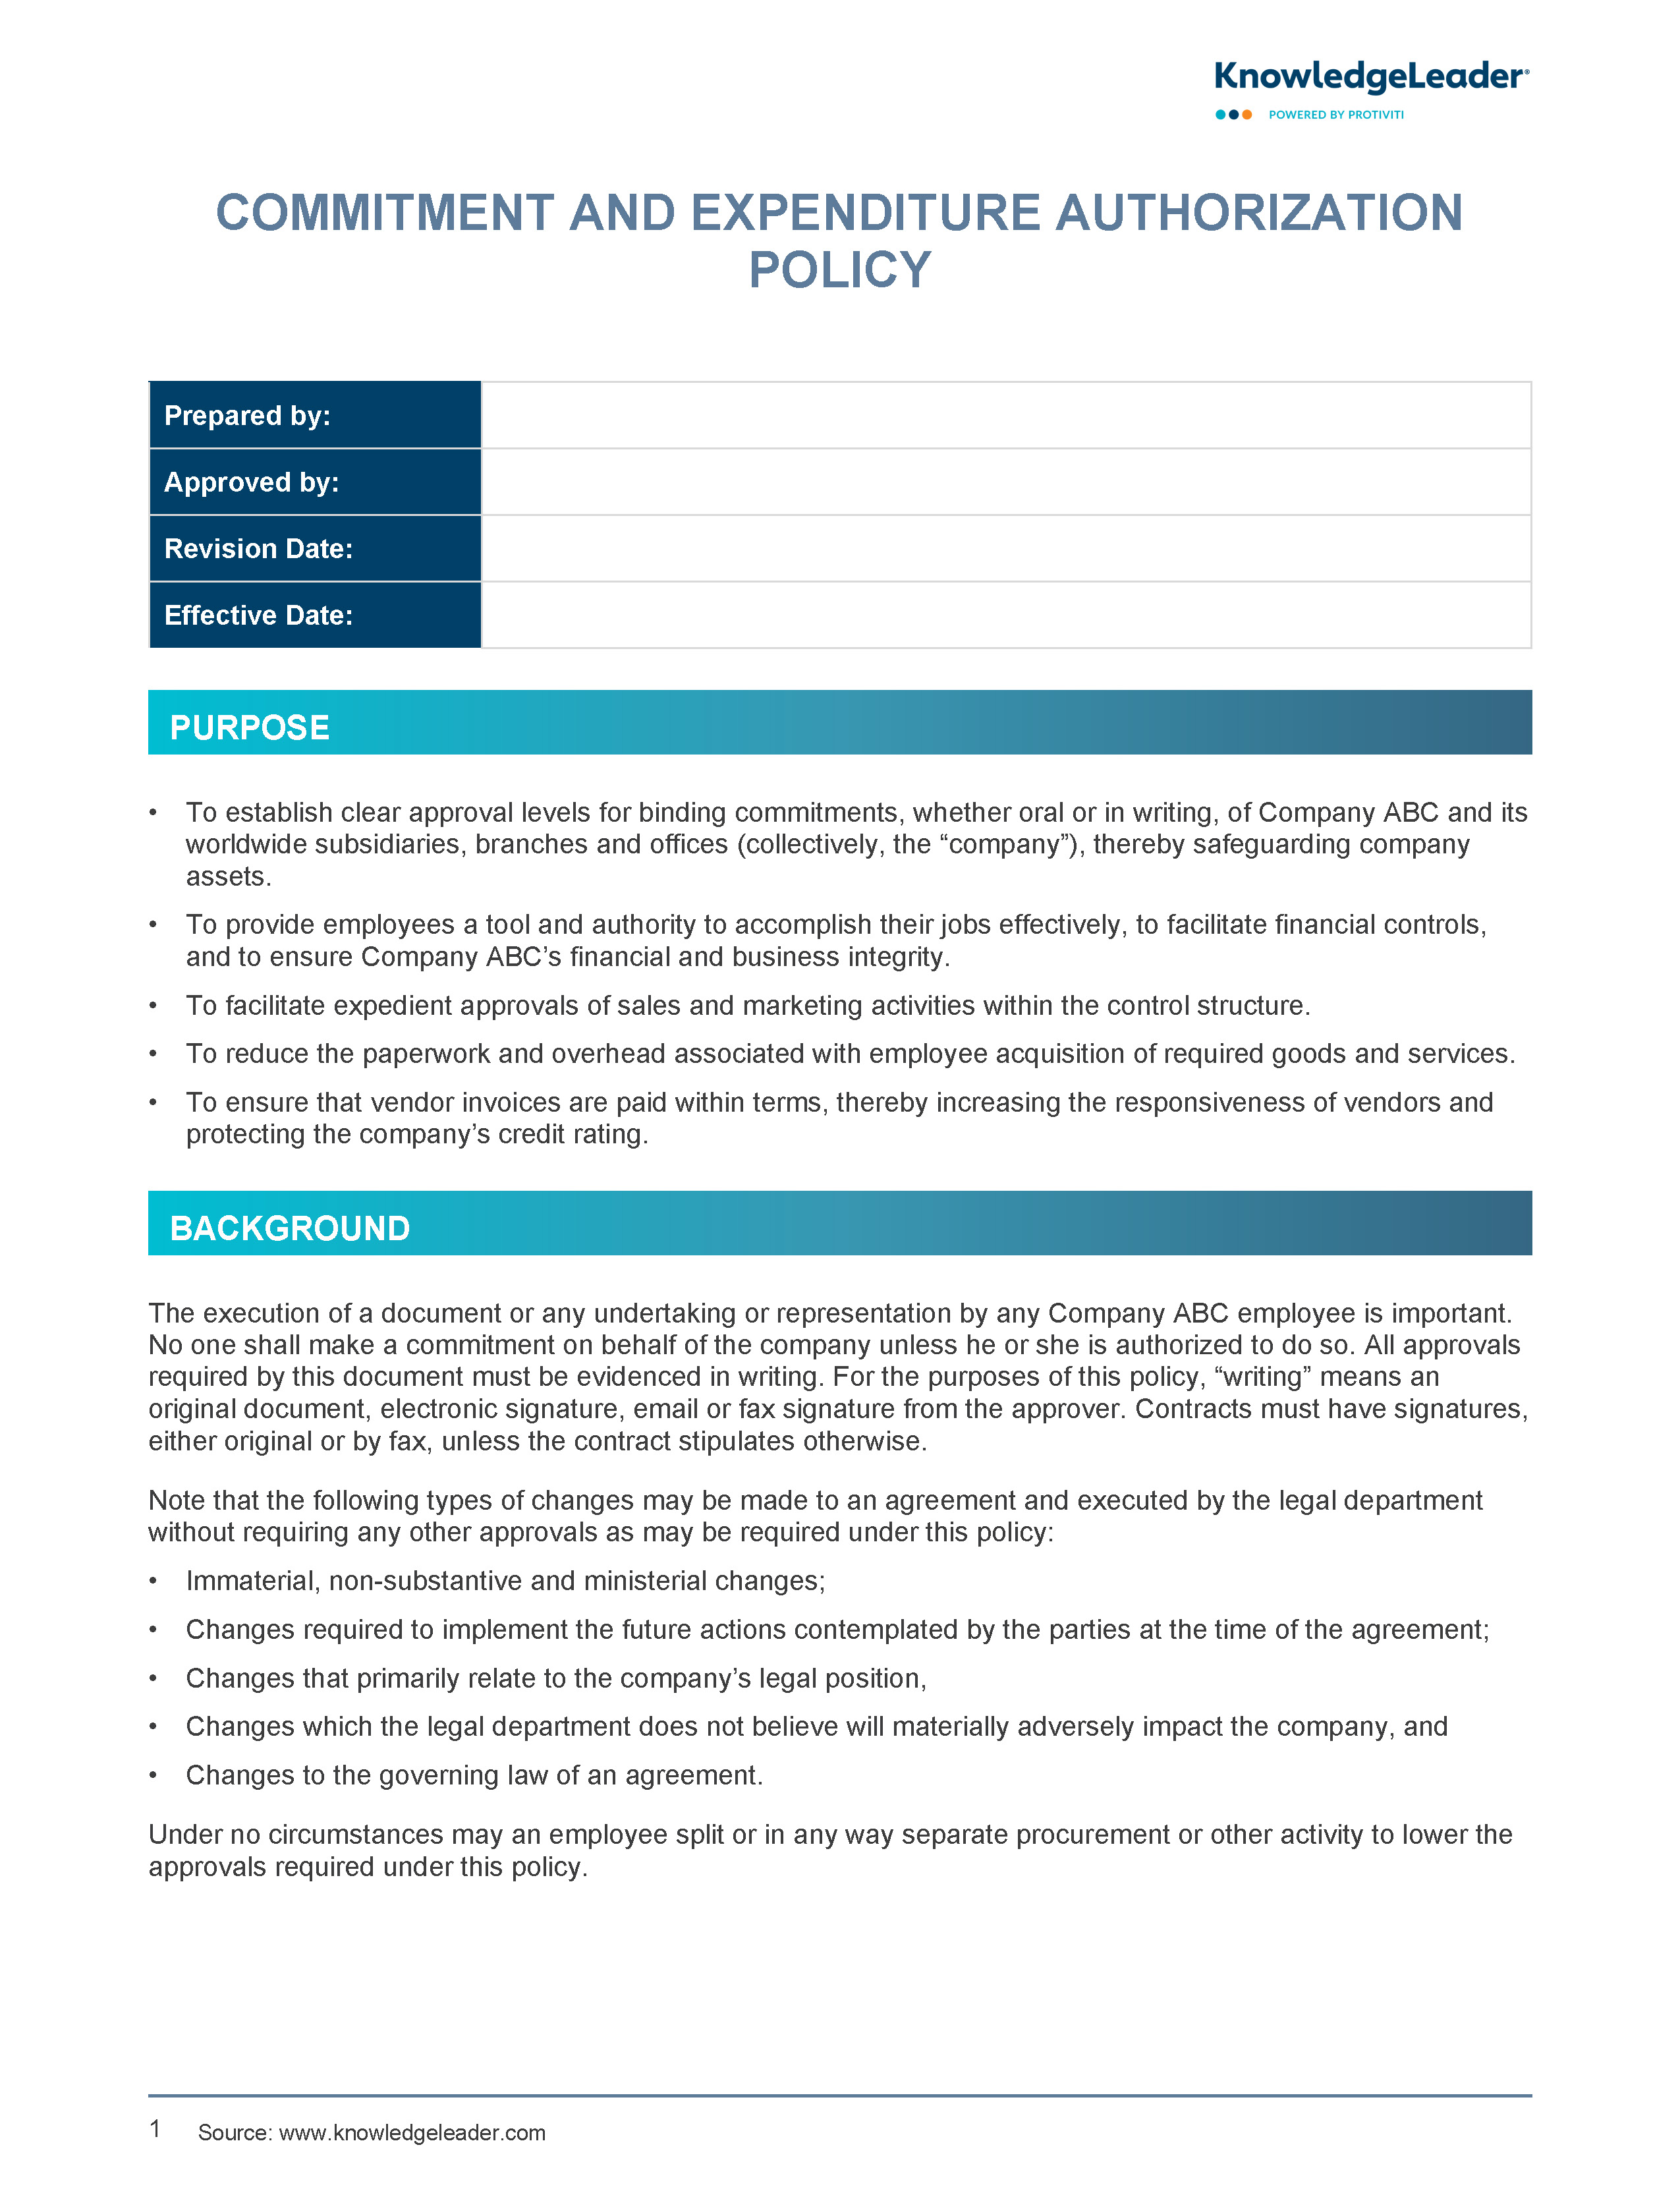 Screenshot of the first page of Commitment and Expenditure Authorization Policy